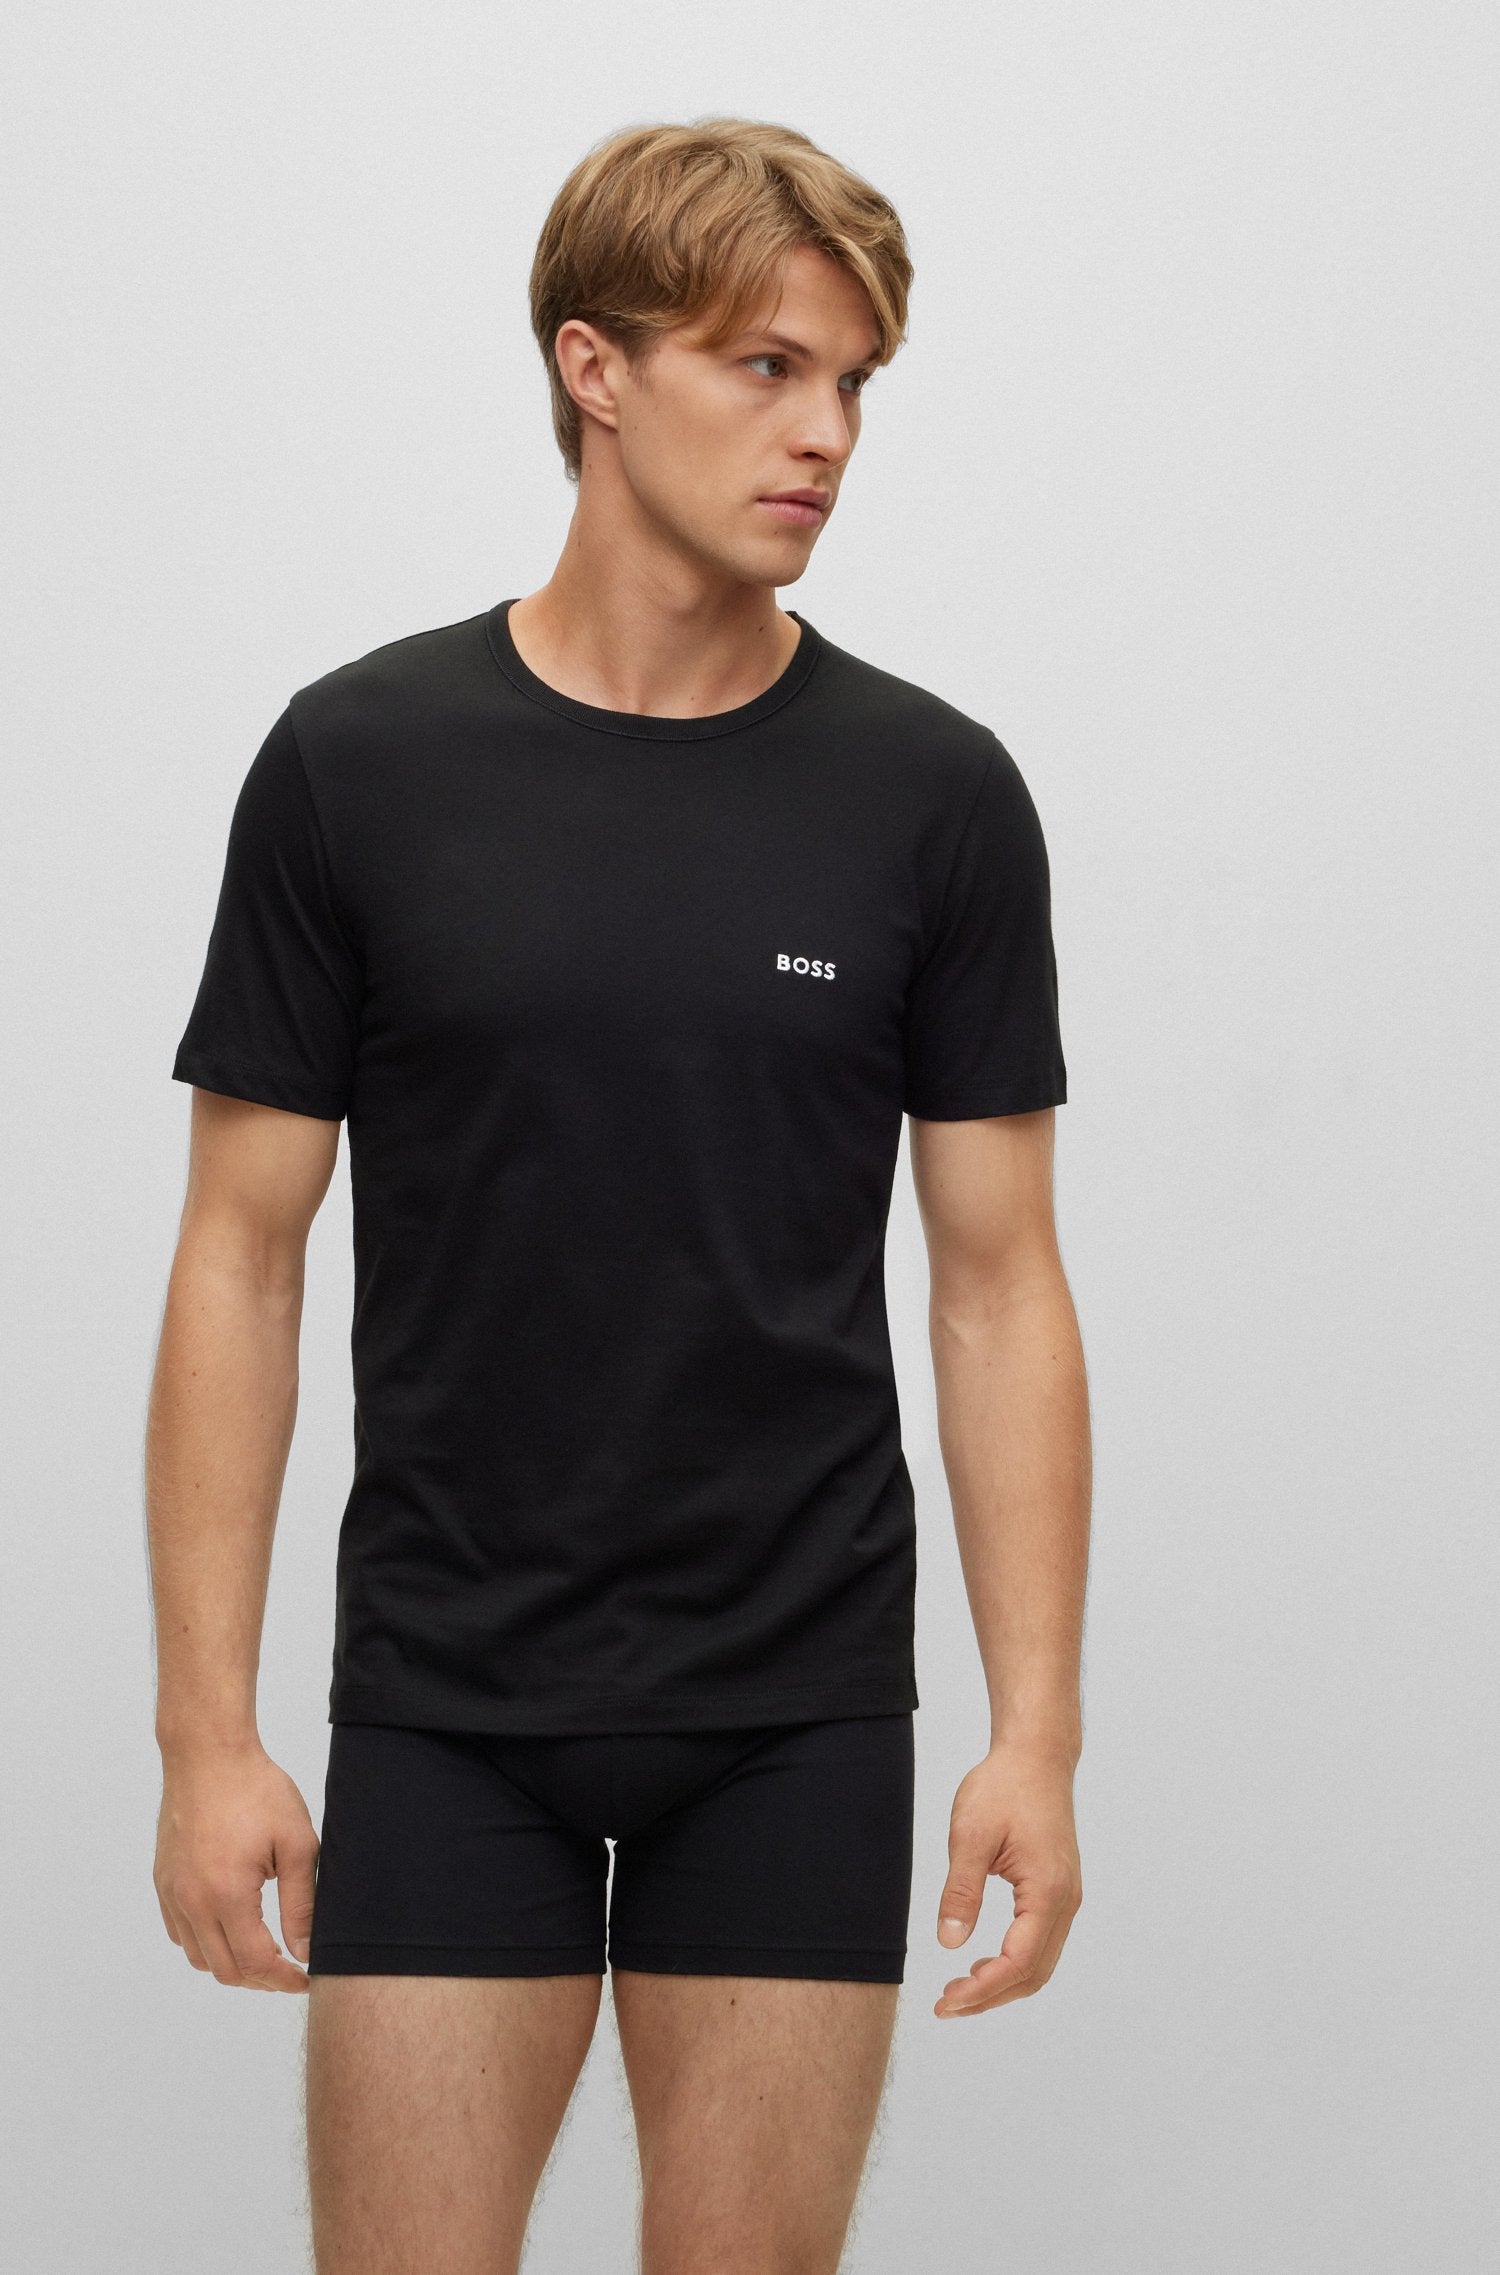 BOSS - 3-Pack Of T-Shirts In Jersey Cotton In Black, Navy and Dark Red 50475286 973